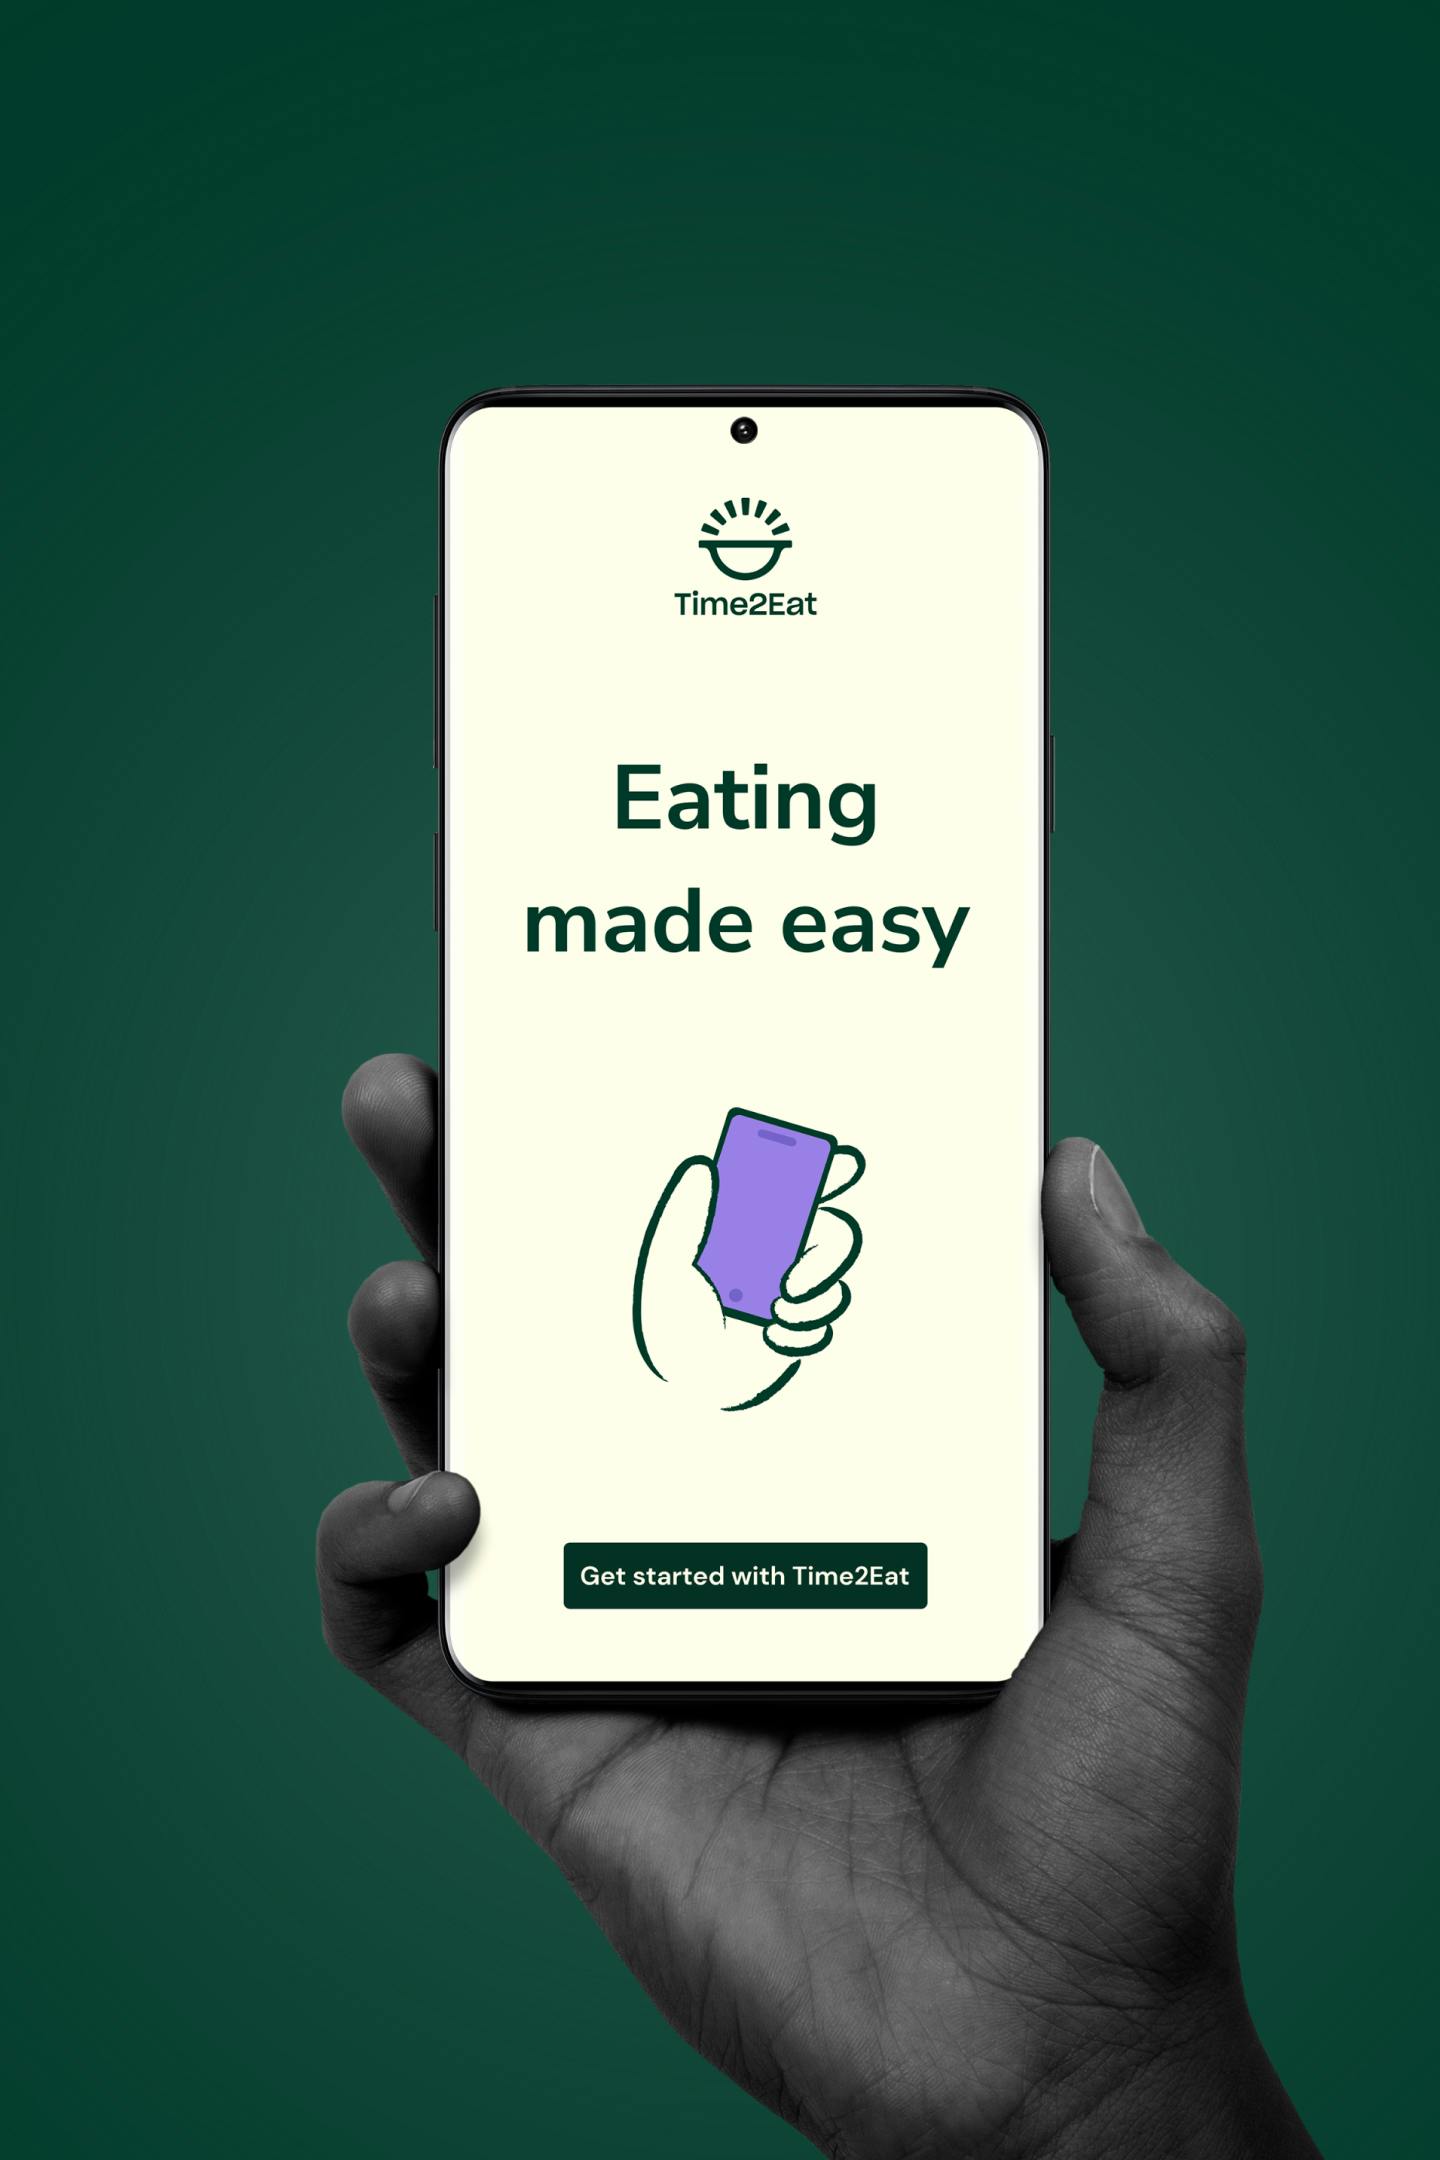 Image of a grey hand holding up a phone with the landing screen of an app for Time to Eat